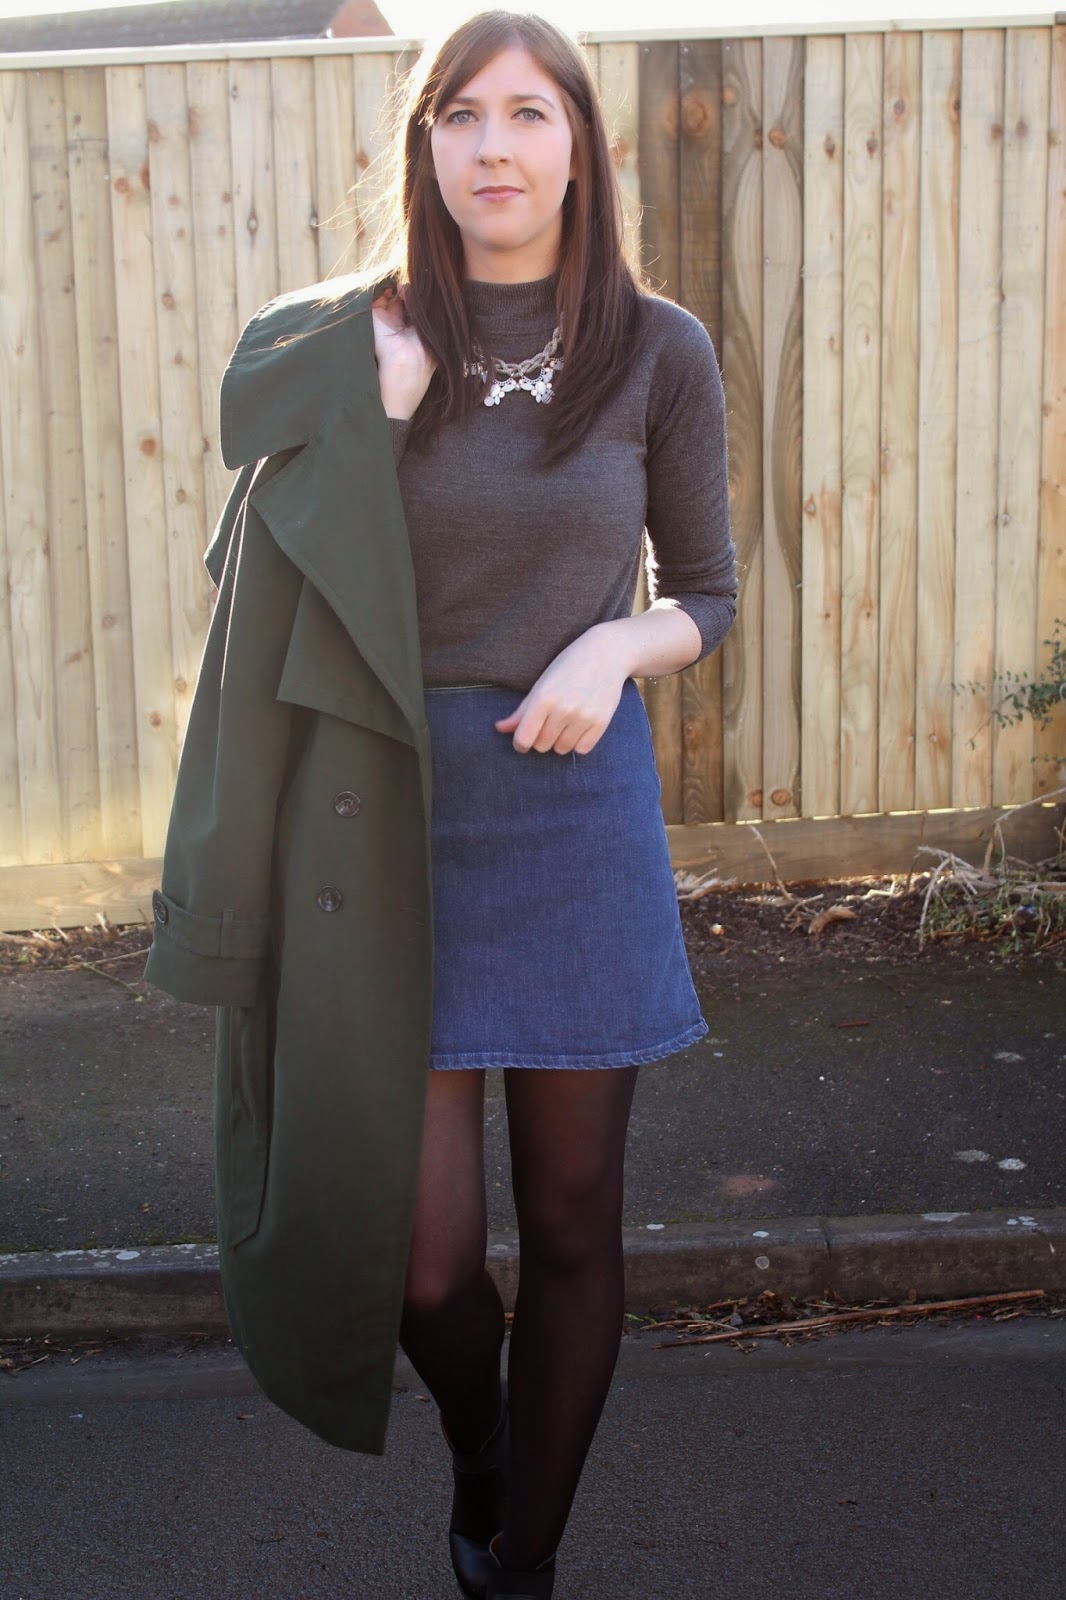 asseenonme, asos, primark, trenchcoat, wiw, whatimwearing, ootd, outfitoftheday, lotd, lookoftheday, alineskirt, denimskirt, rollneck, fbloggers, fblogger, fashionbloggers, fashion, chelseaboots, necklace,  halcyonevelvet